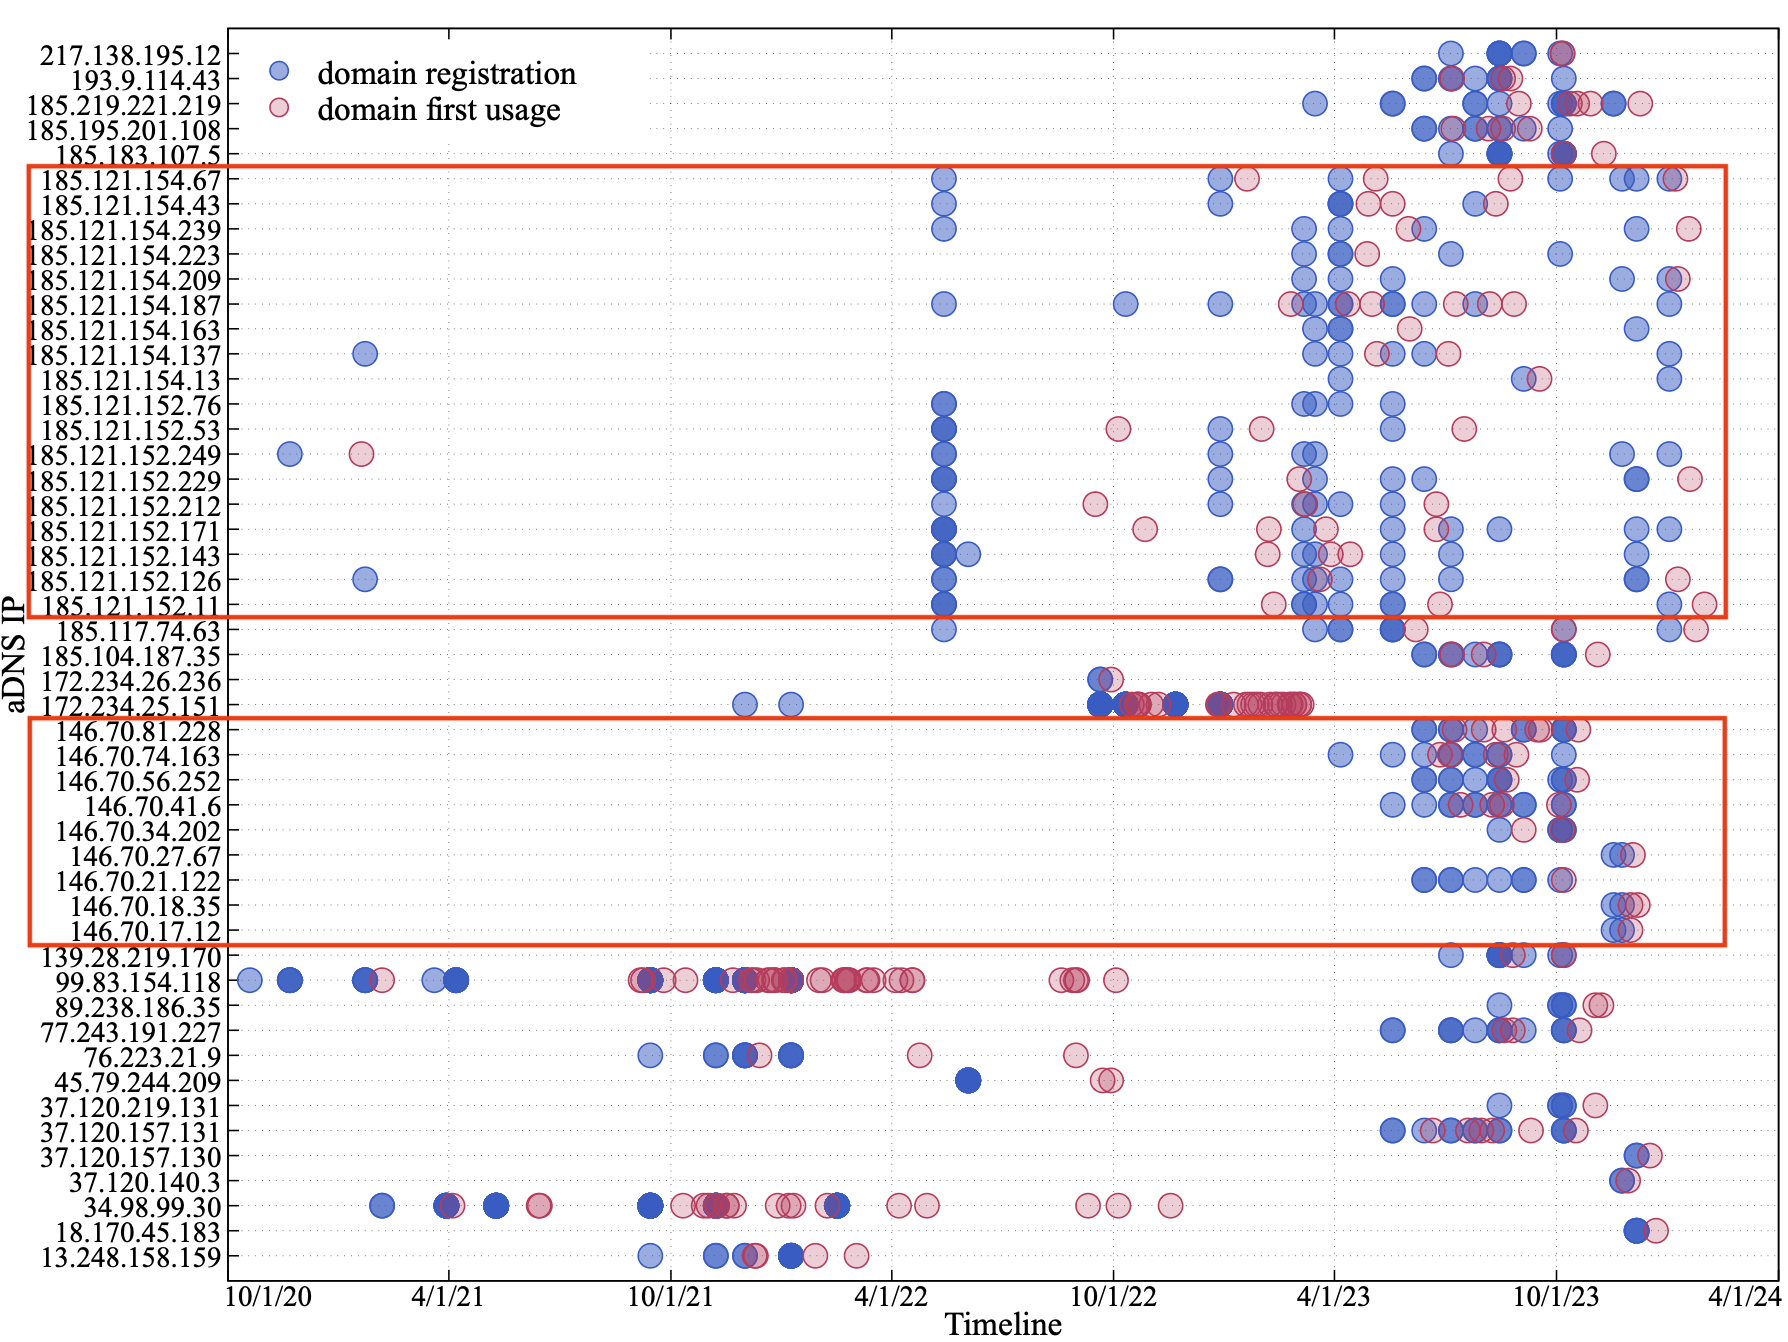 Image 4 is a timeline of domain registration (blue dots) and domain first use (red dots). The horizontal axis shows the timeline, which covers November 2020 through April 2024. The vertical axis shows the IP address. There are many clusters starting in late 2024 and extending into April. 